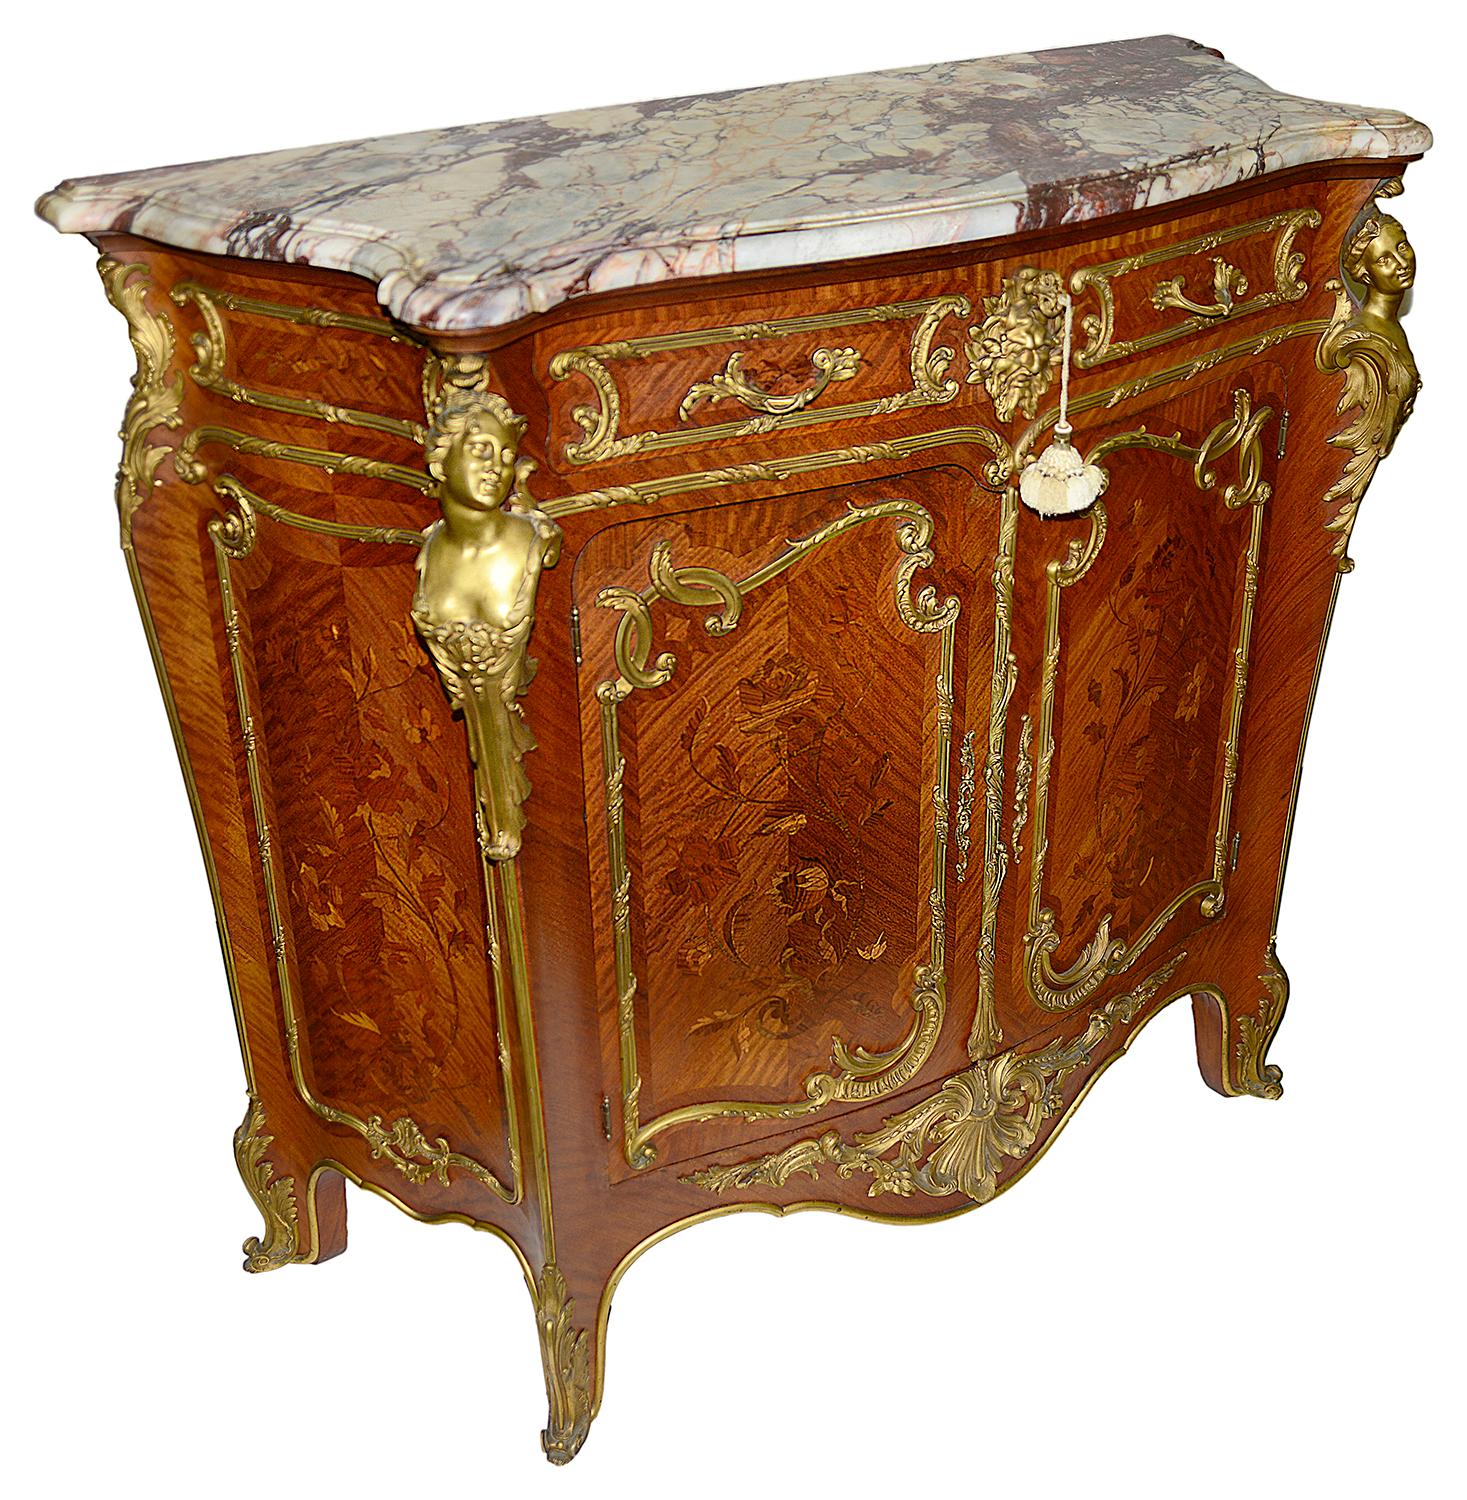 A superb and rare pair of Louis XV style ormolu-mounted side cabinets having the original breche marble tops, wonderful marquetry inlaid panels to the doors and sides. Scrolling ormolu mounts, mythical masks to the drawer fronts and carriatide